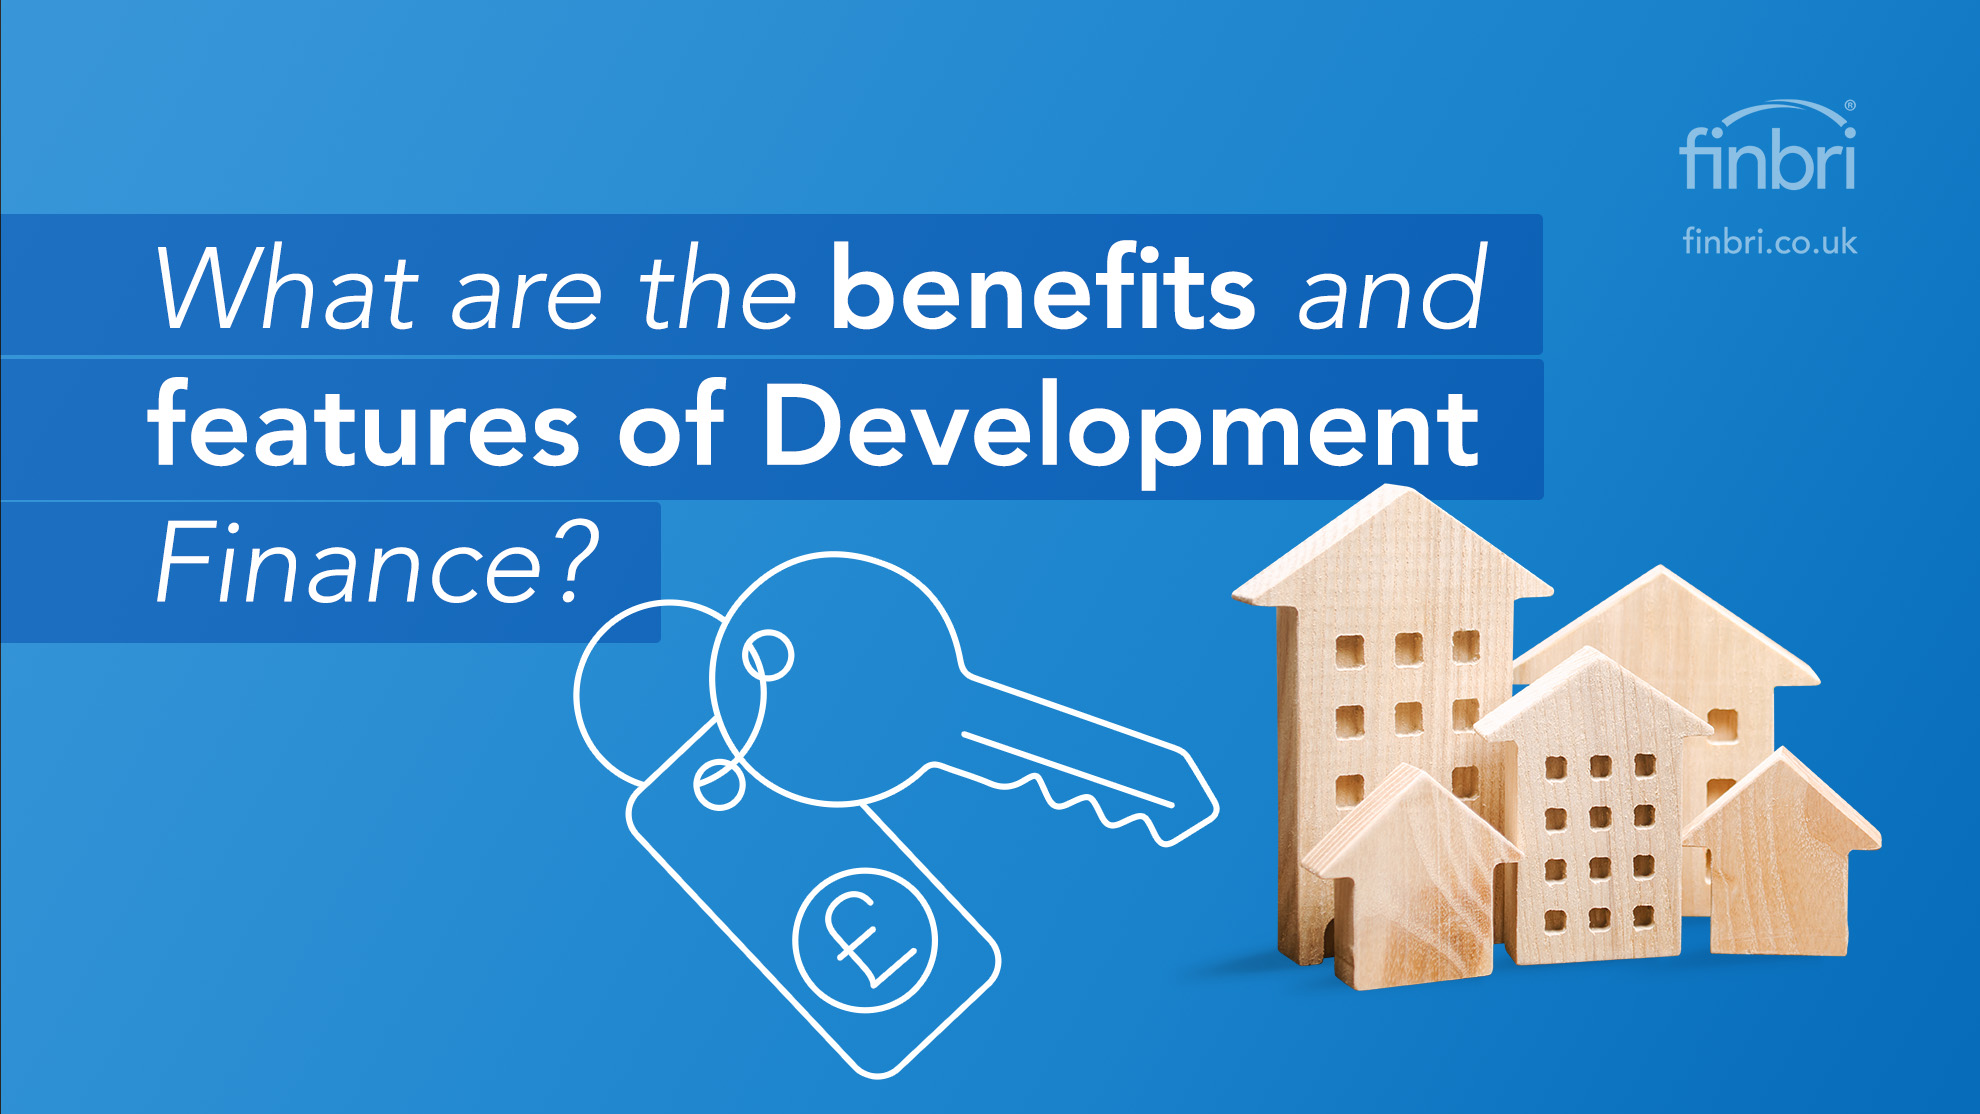 What are the benefits of Development Finance?